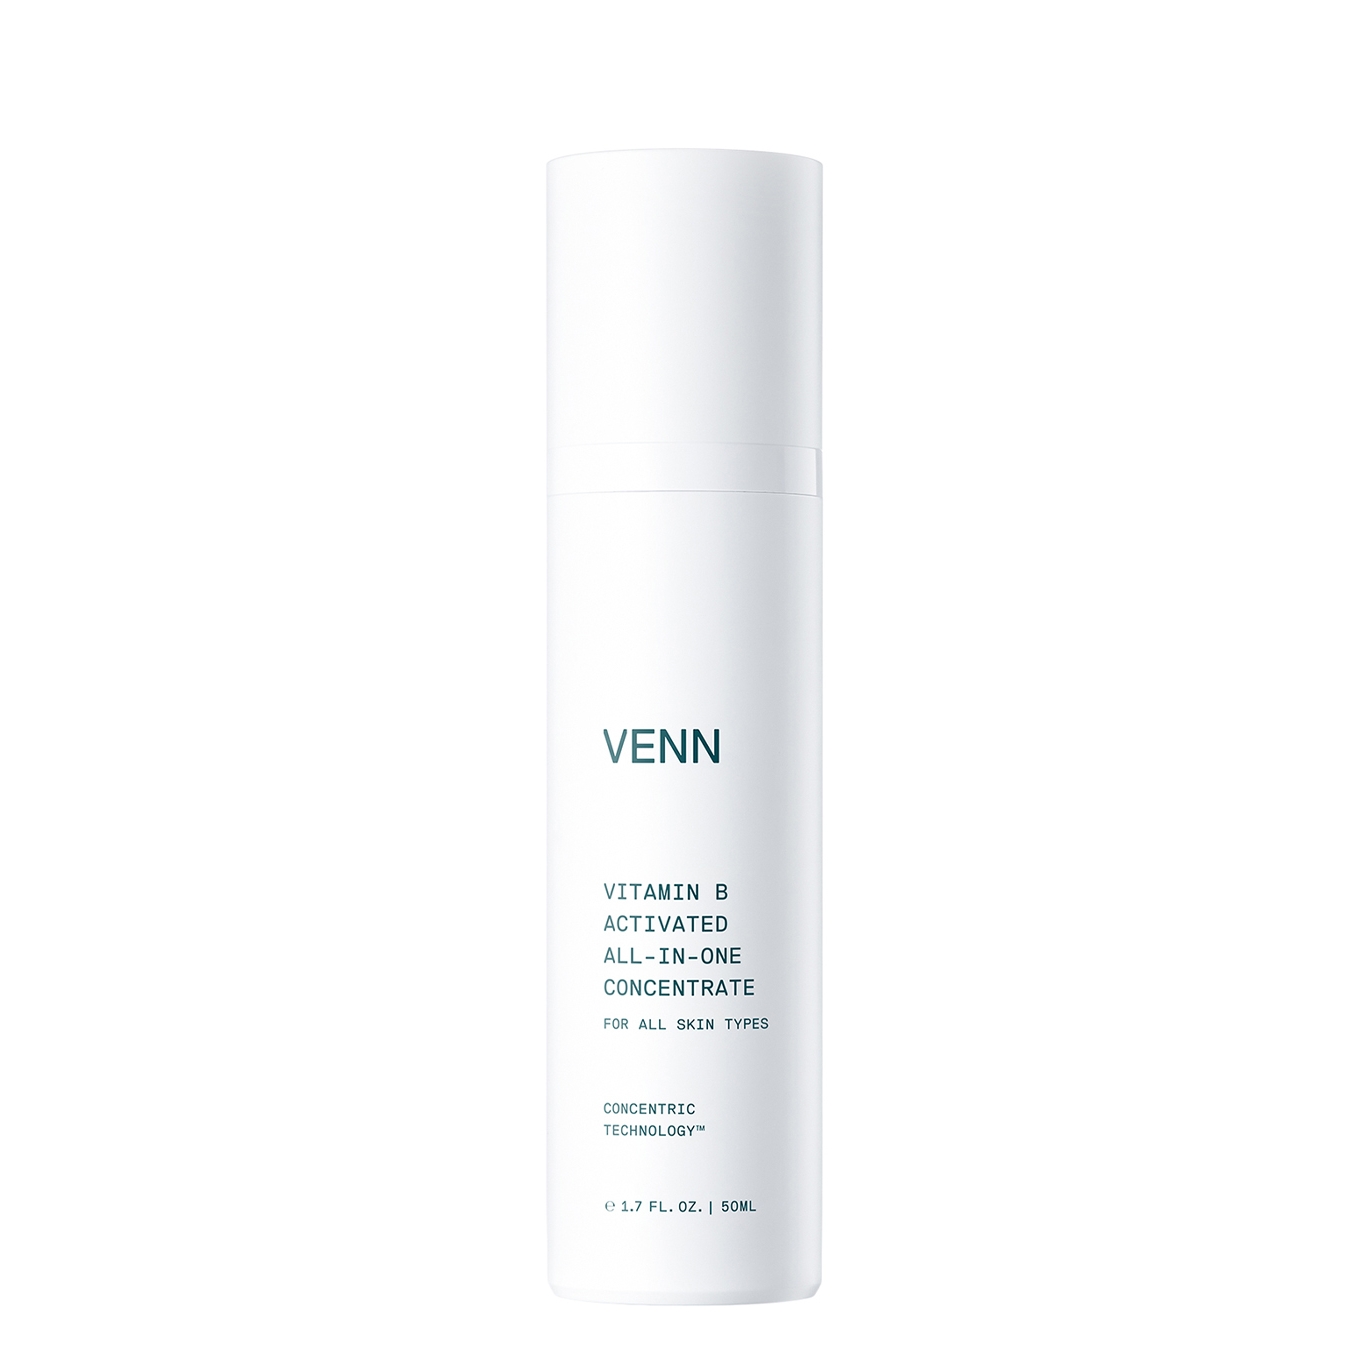 venn vitamin b activated all-in-one concentrate 50ml